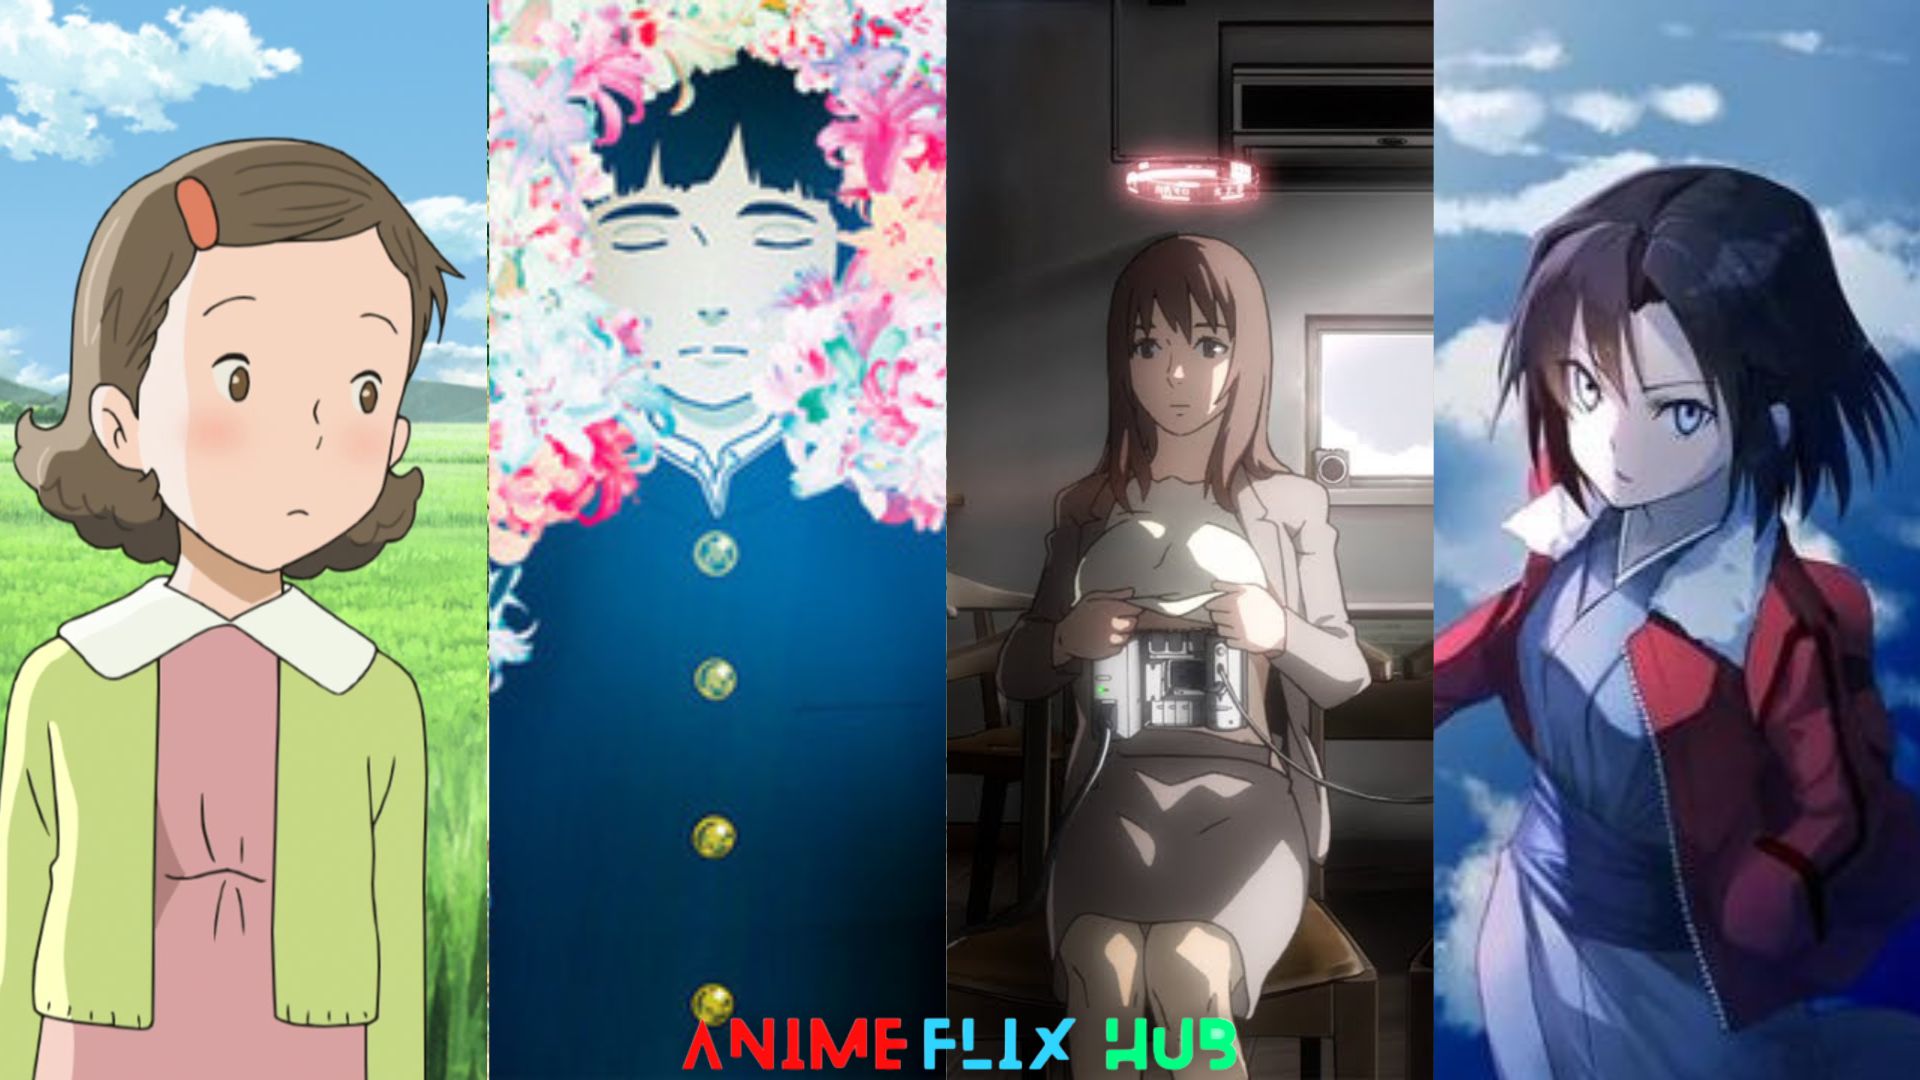 Unearth 5 Hidden Gems: Anime Movies from the 2000s You've Likely Forgotten